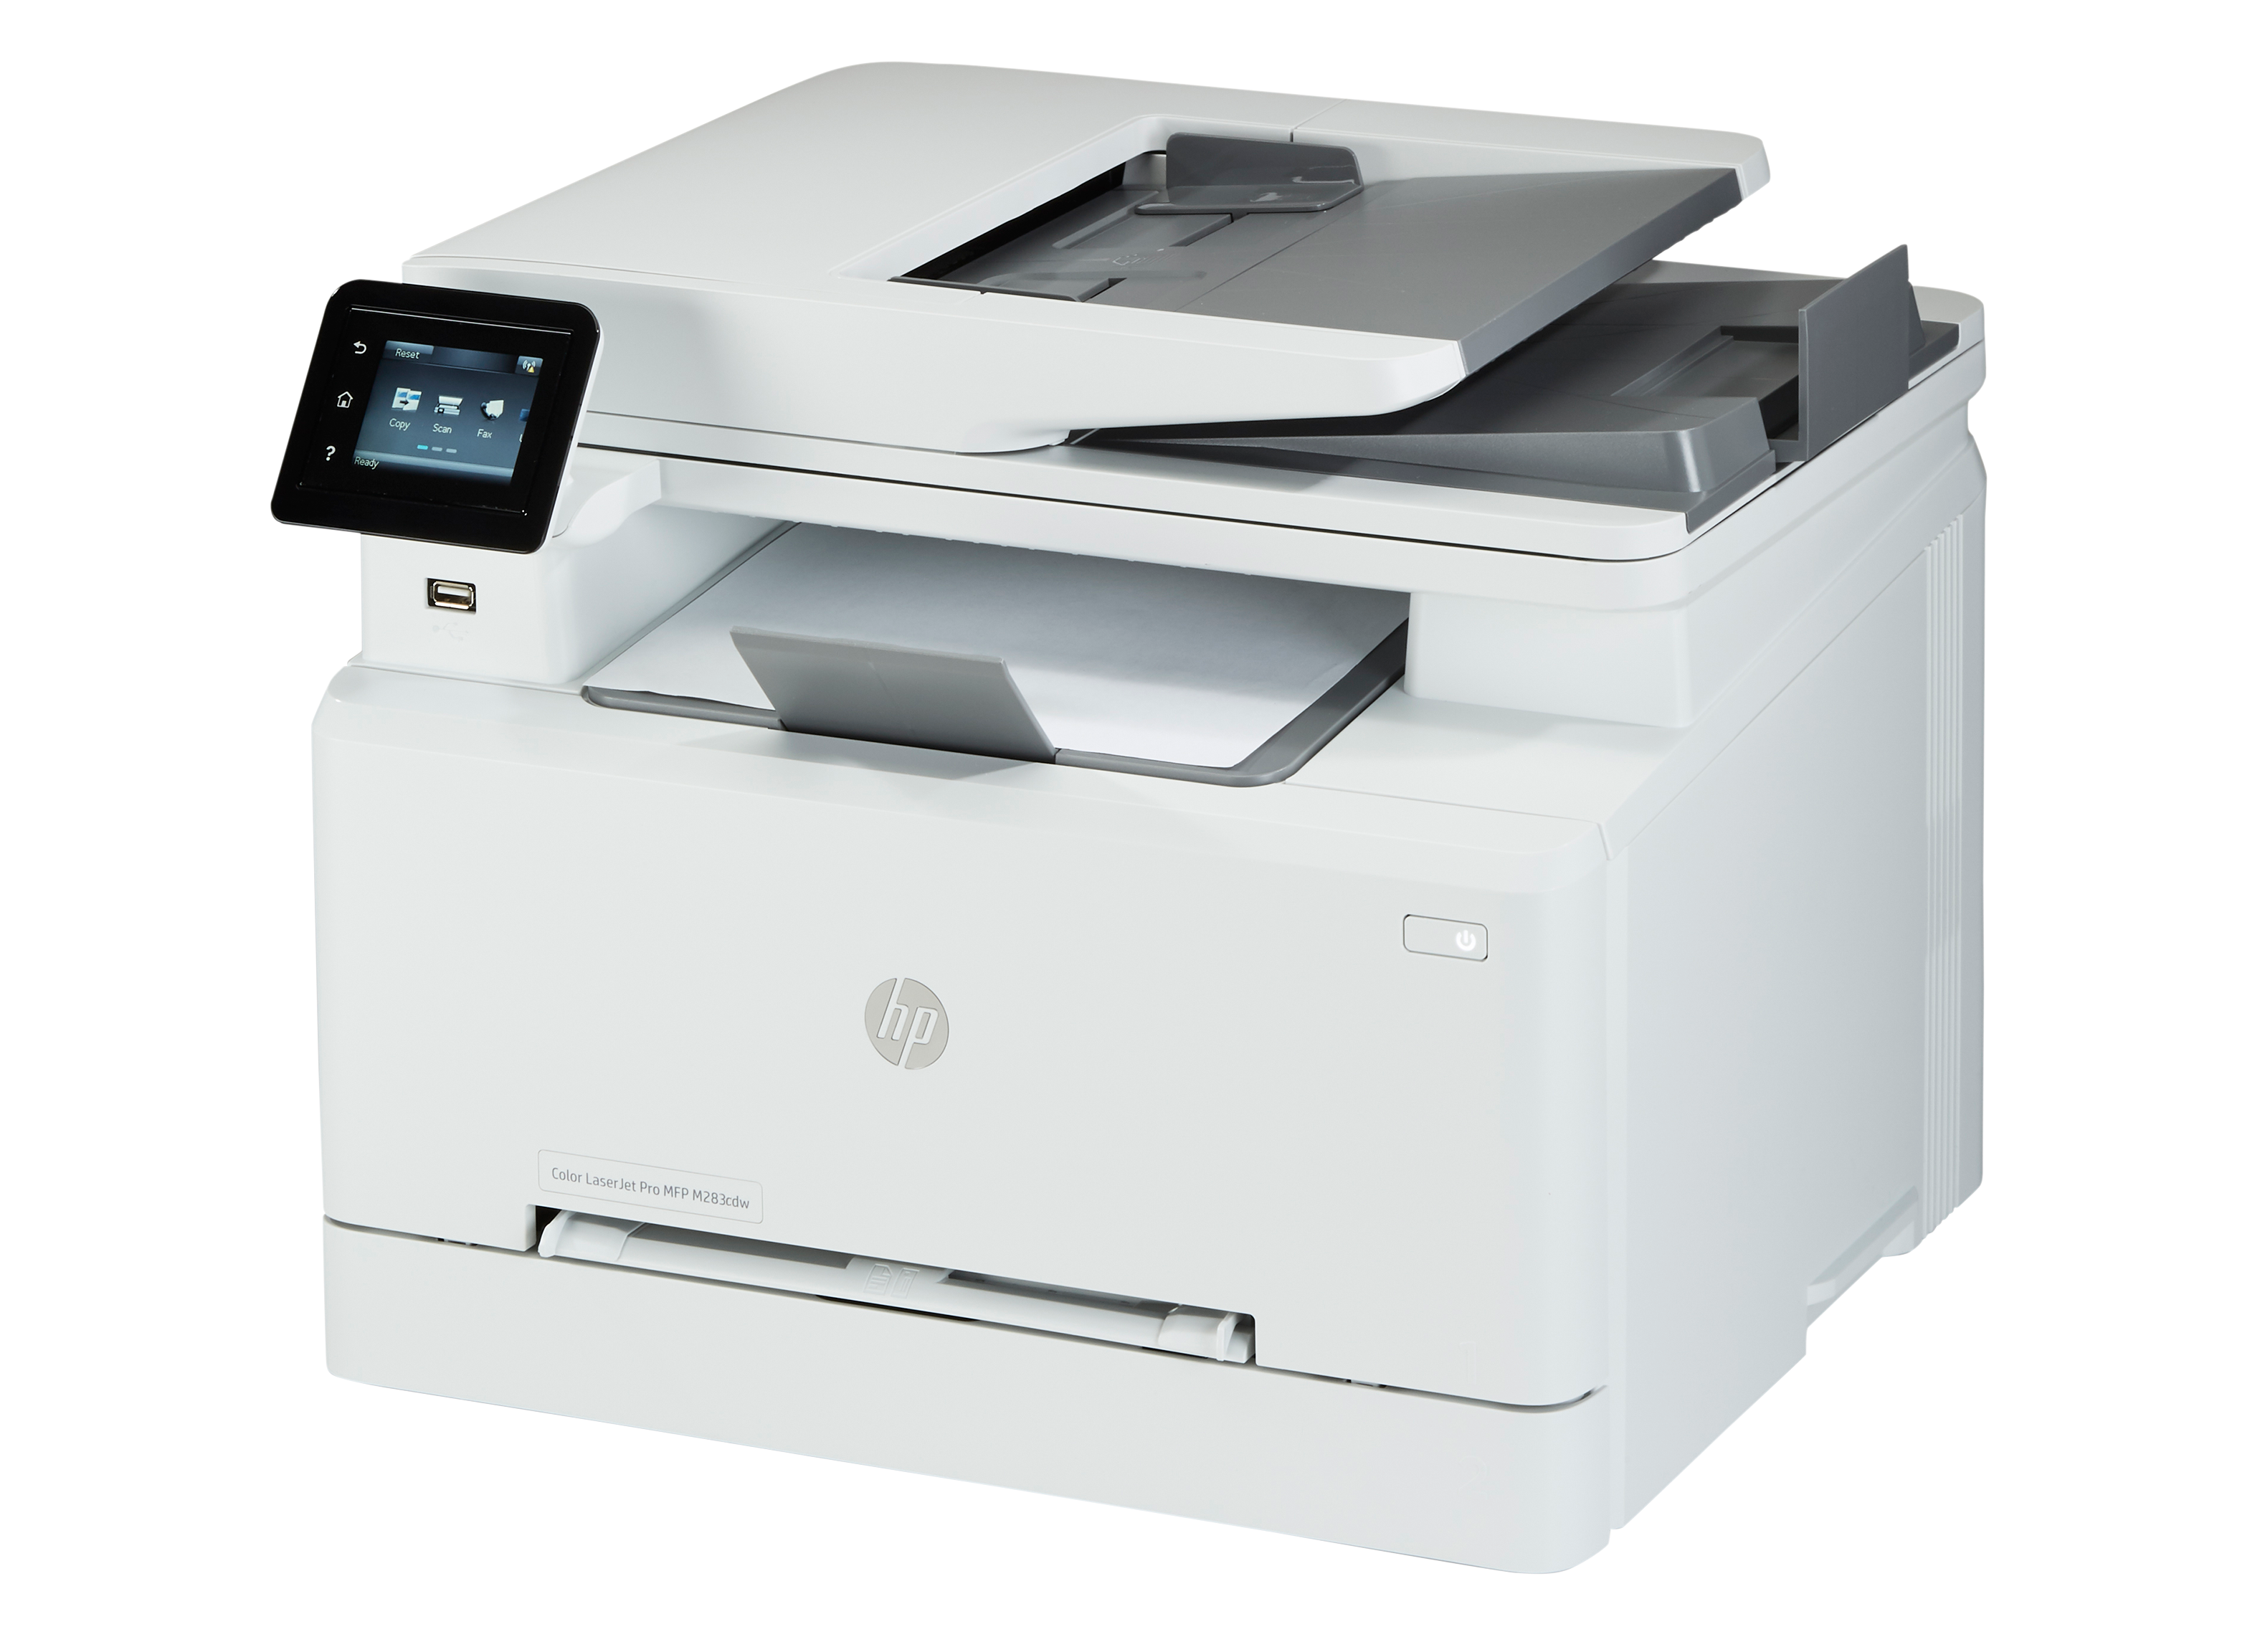 HP Color Laserjet Pro MFP M283cdw Printer Review - Consumer Reports